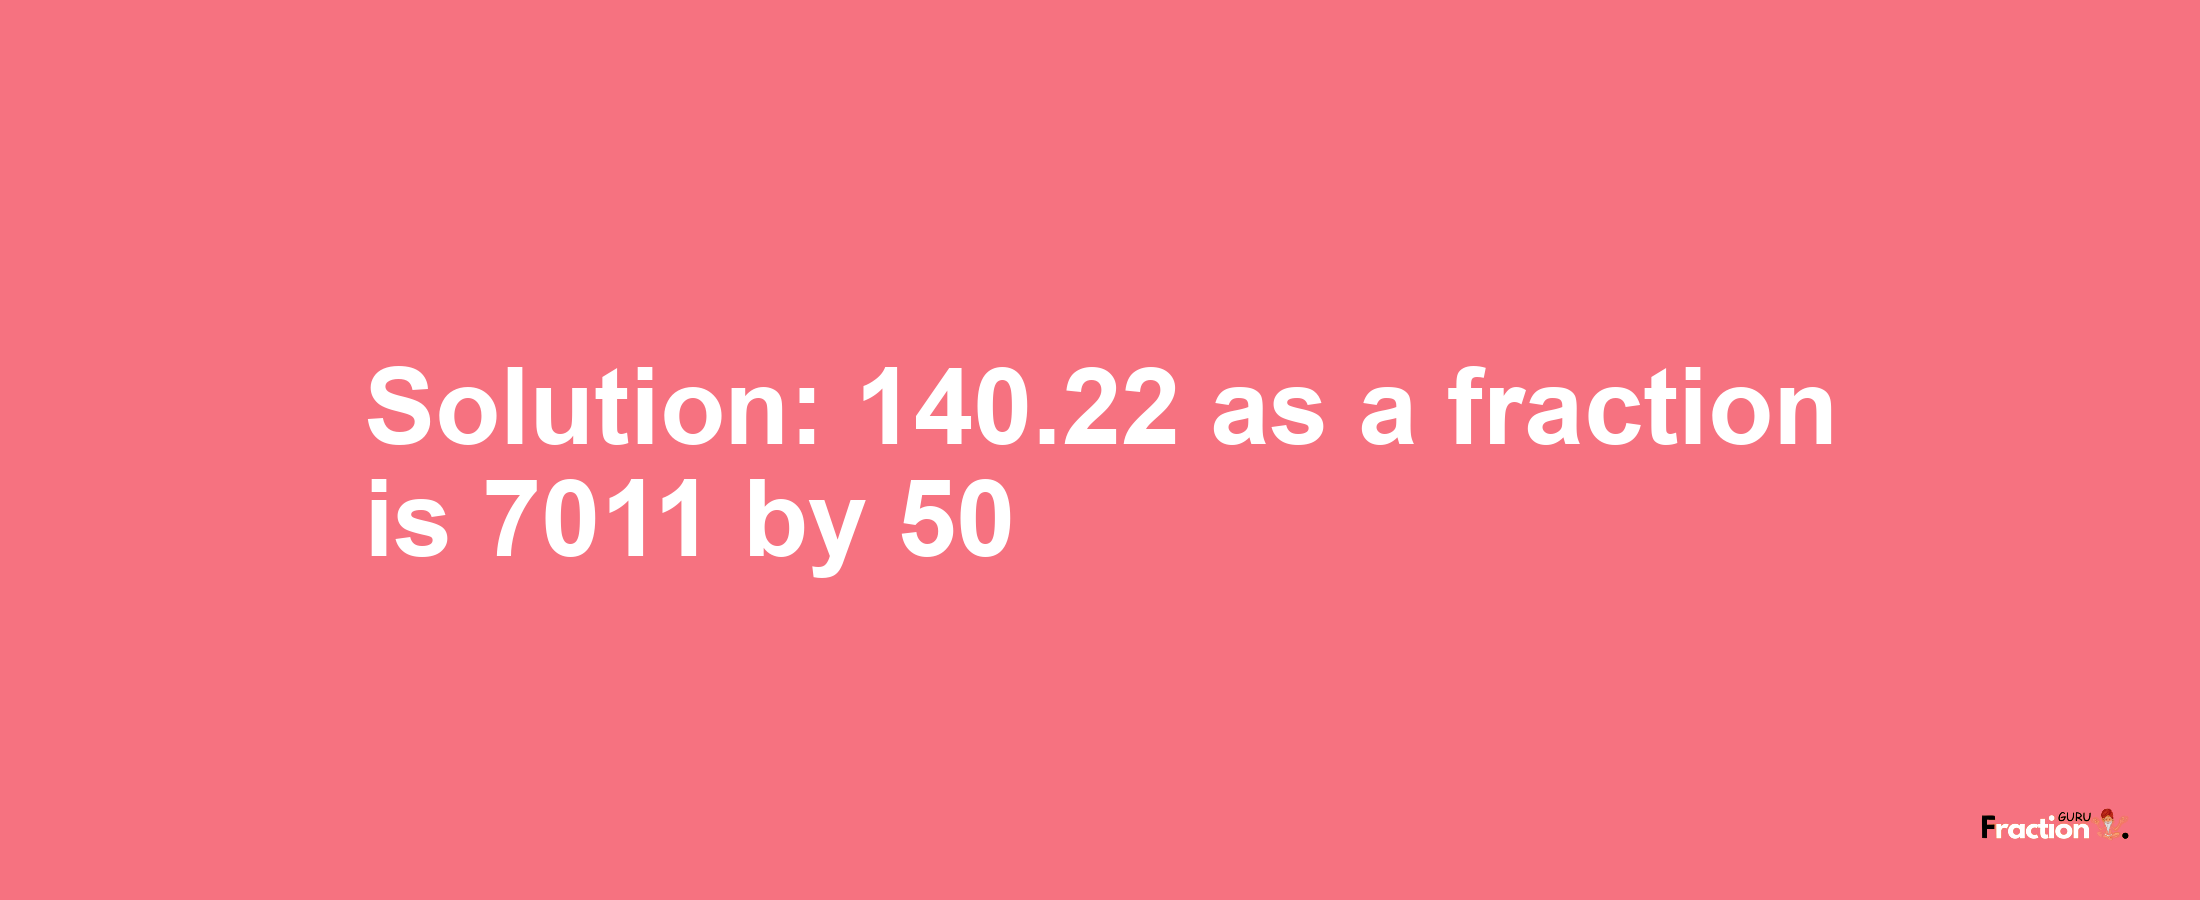 Solution:140.22 as a fraction is 7011/50